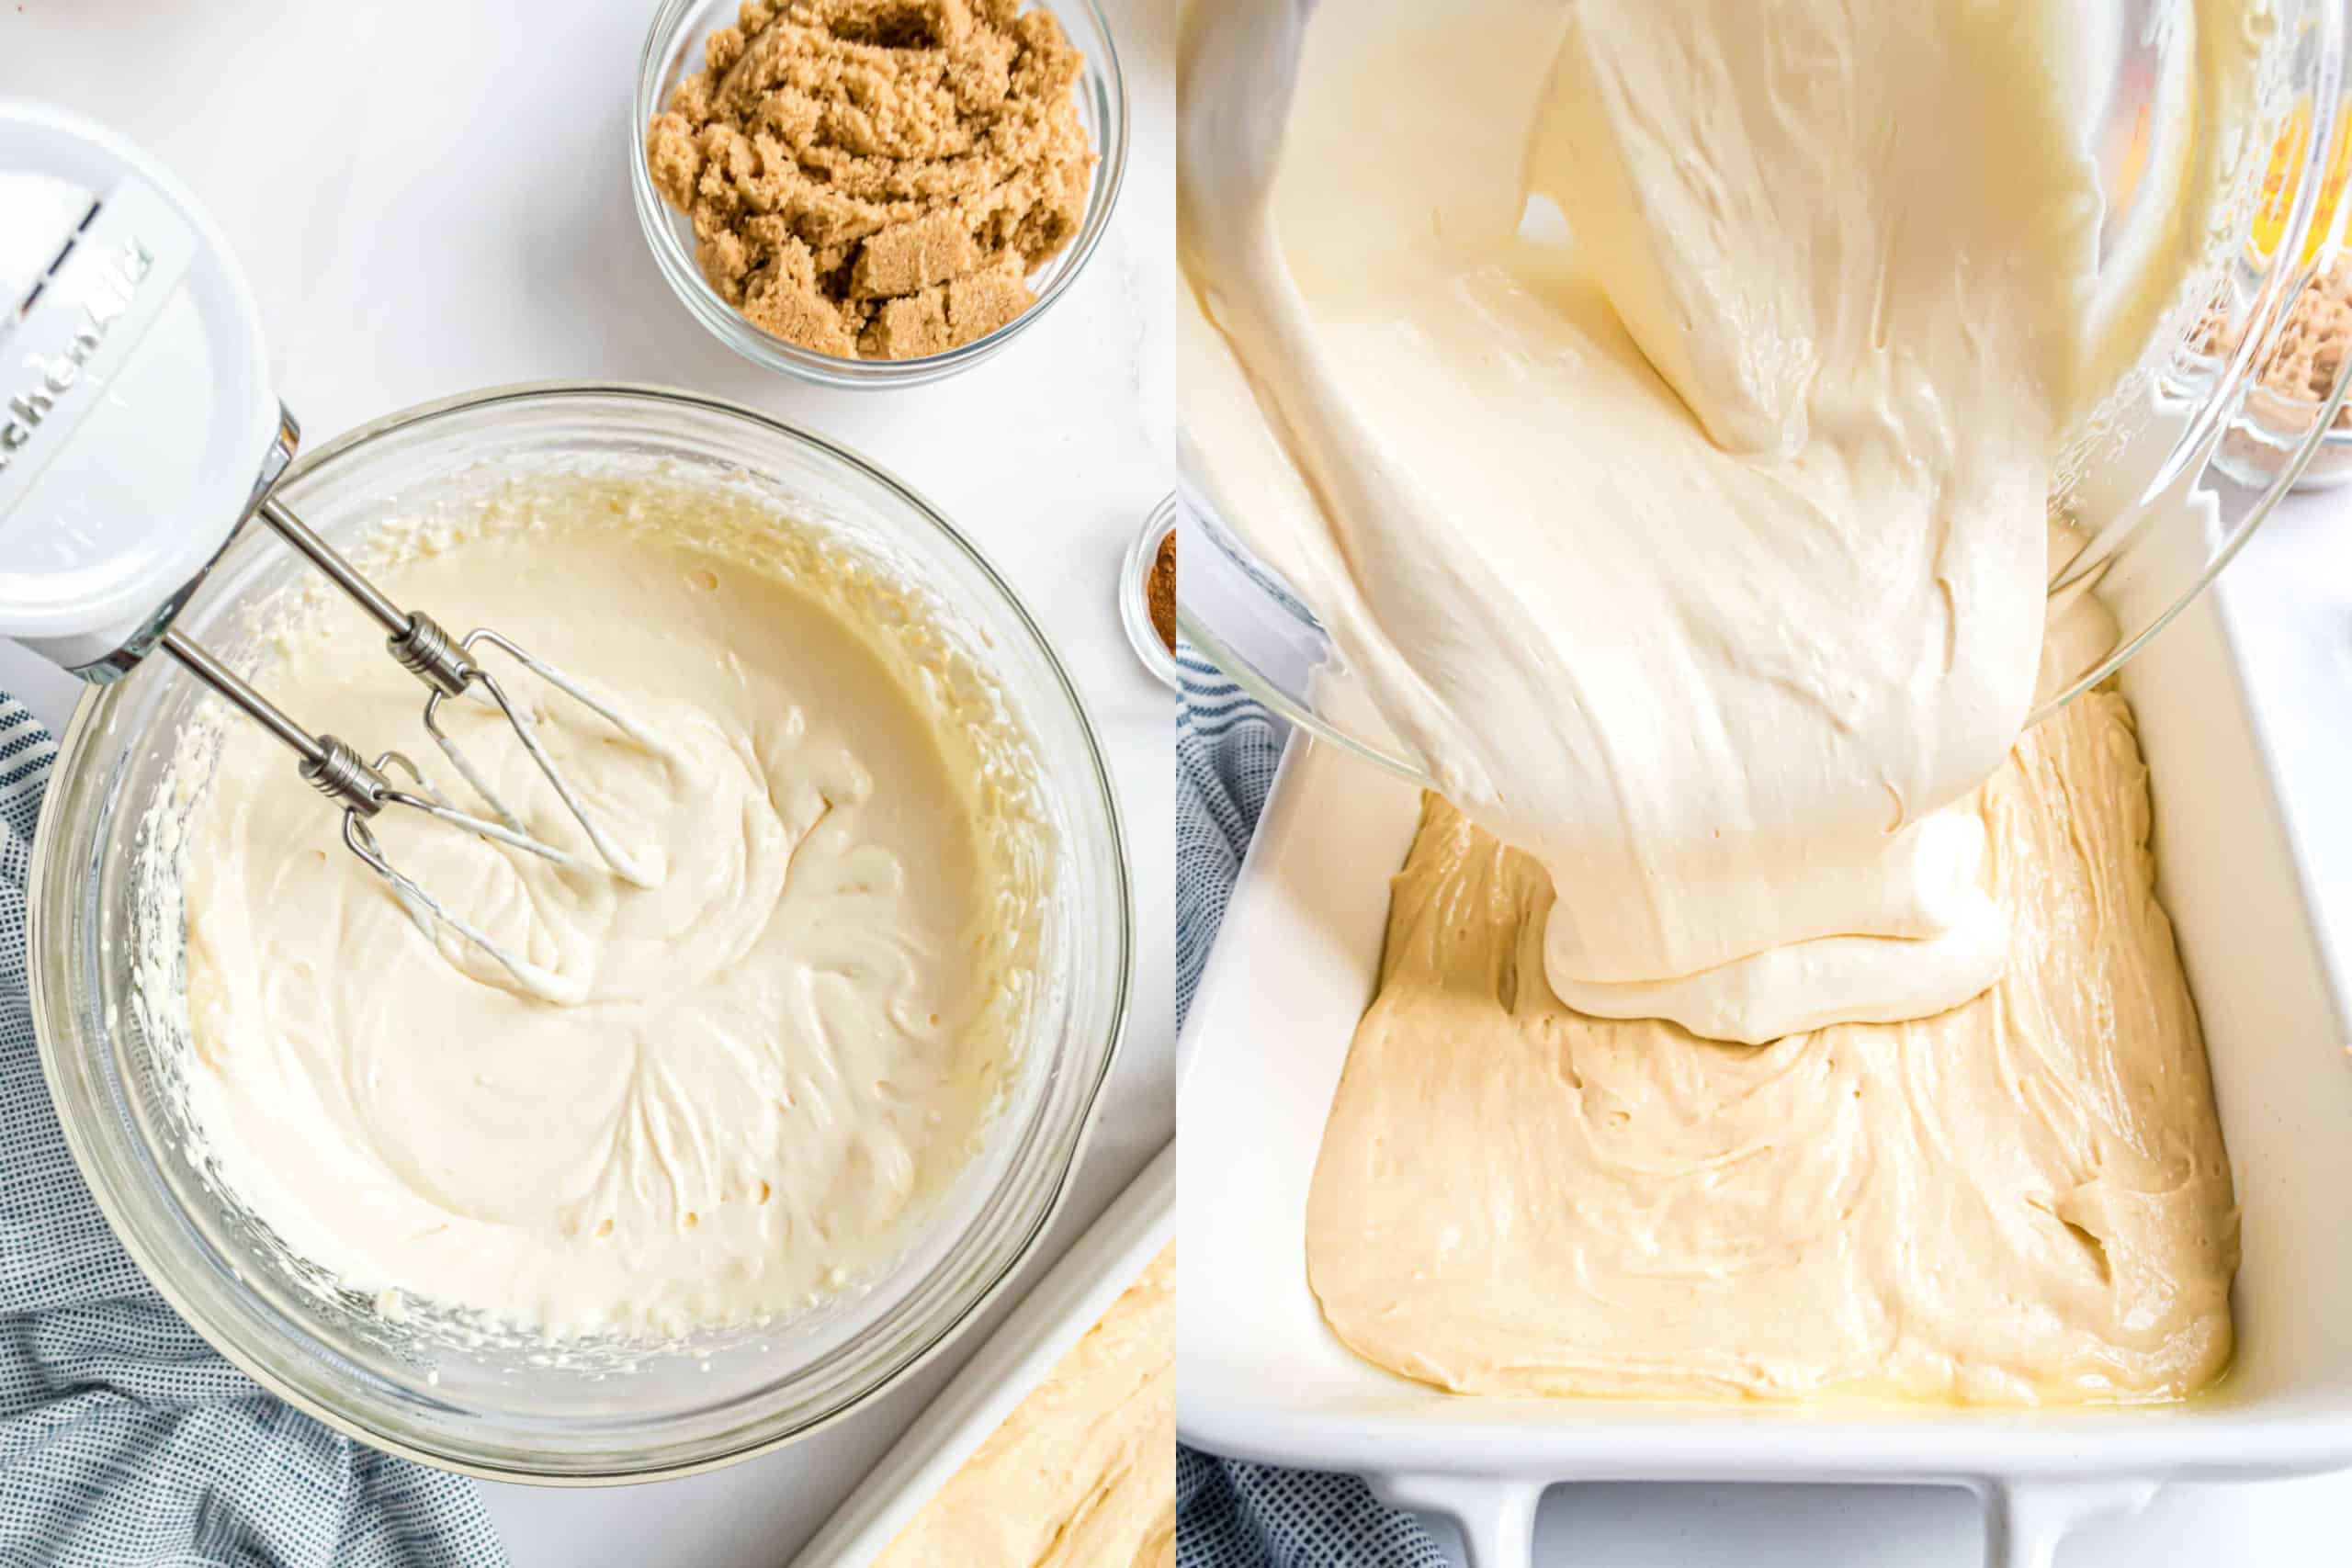 Step by step photos showing how to make cream cheese filling.